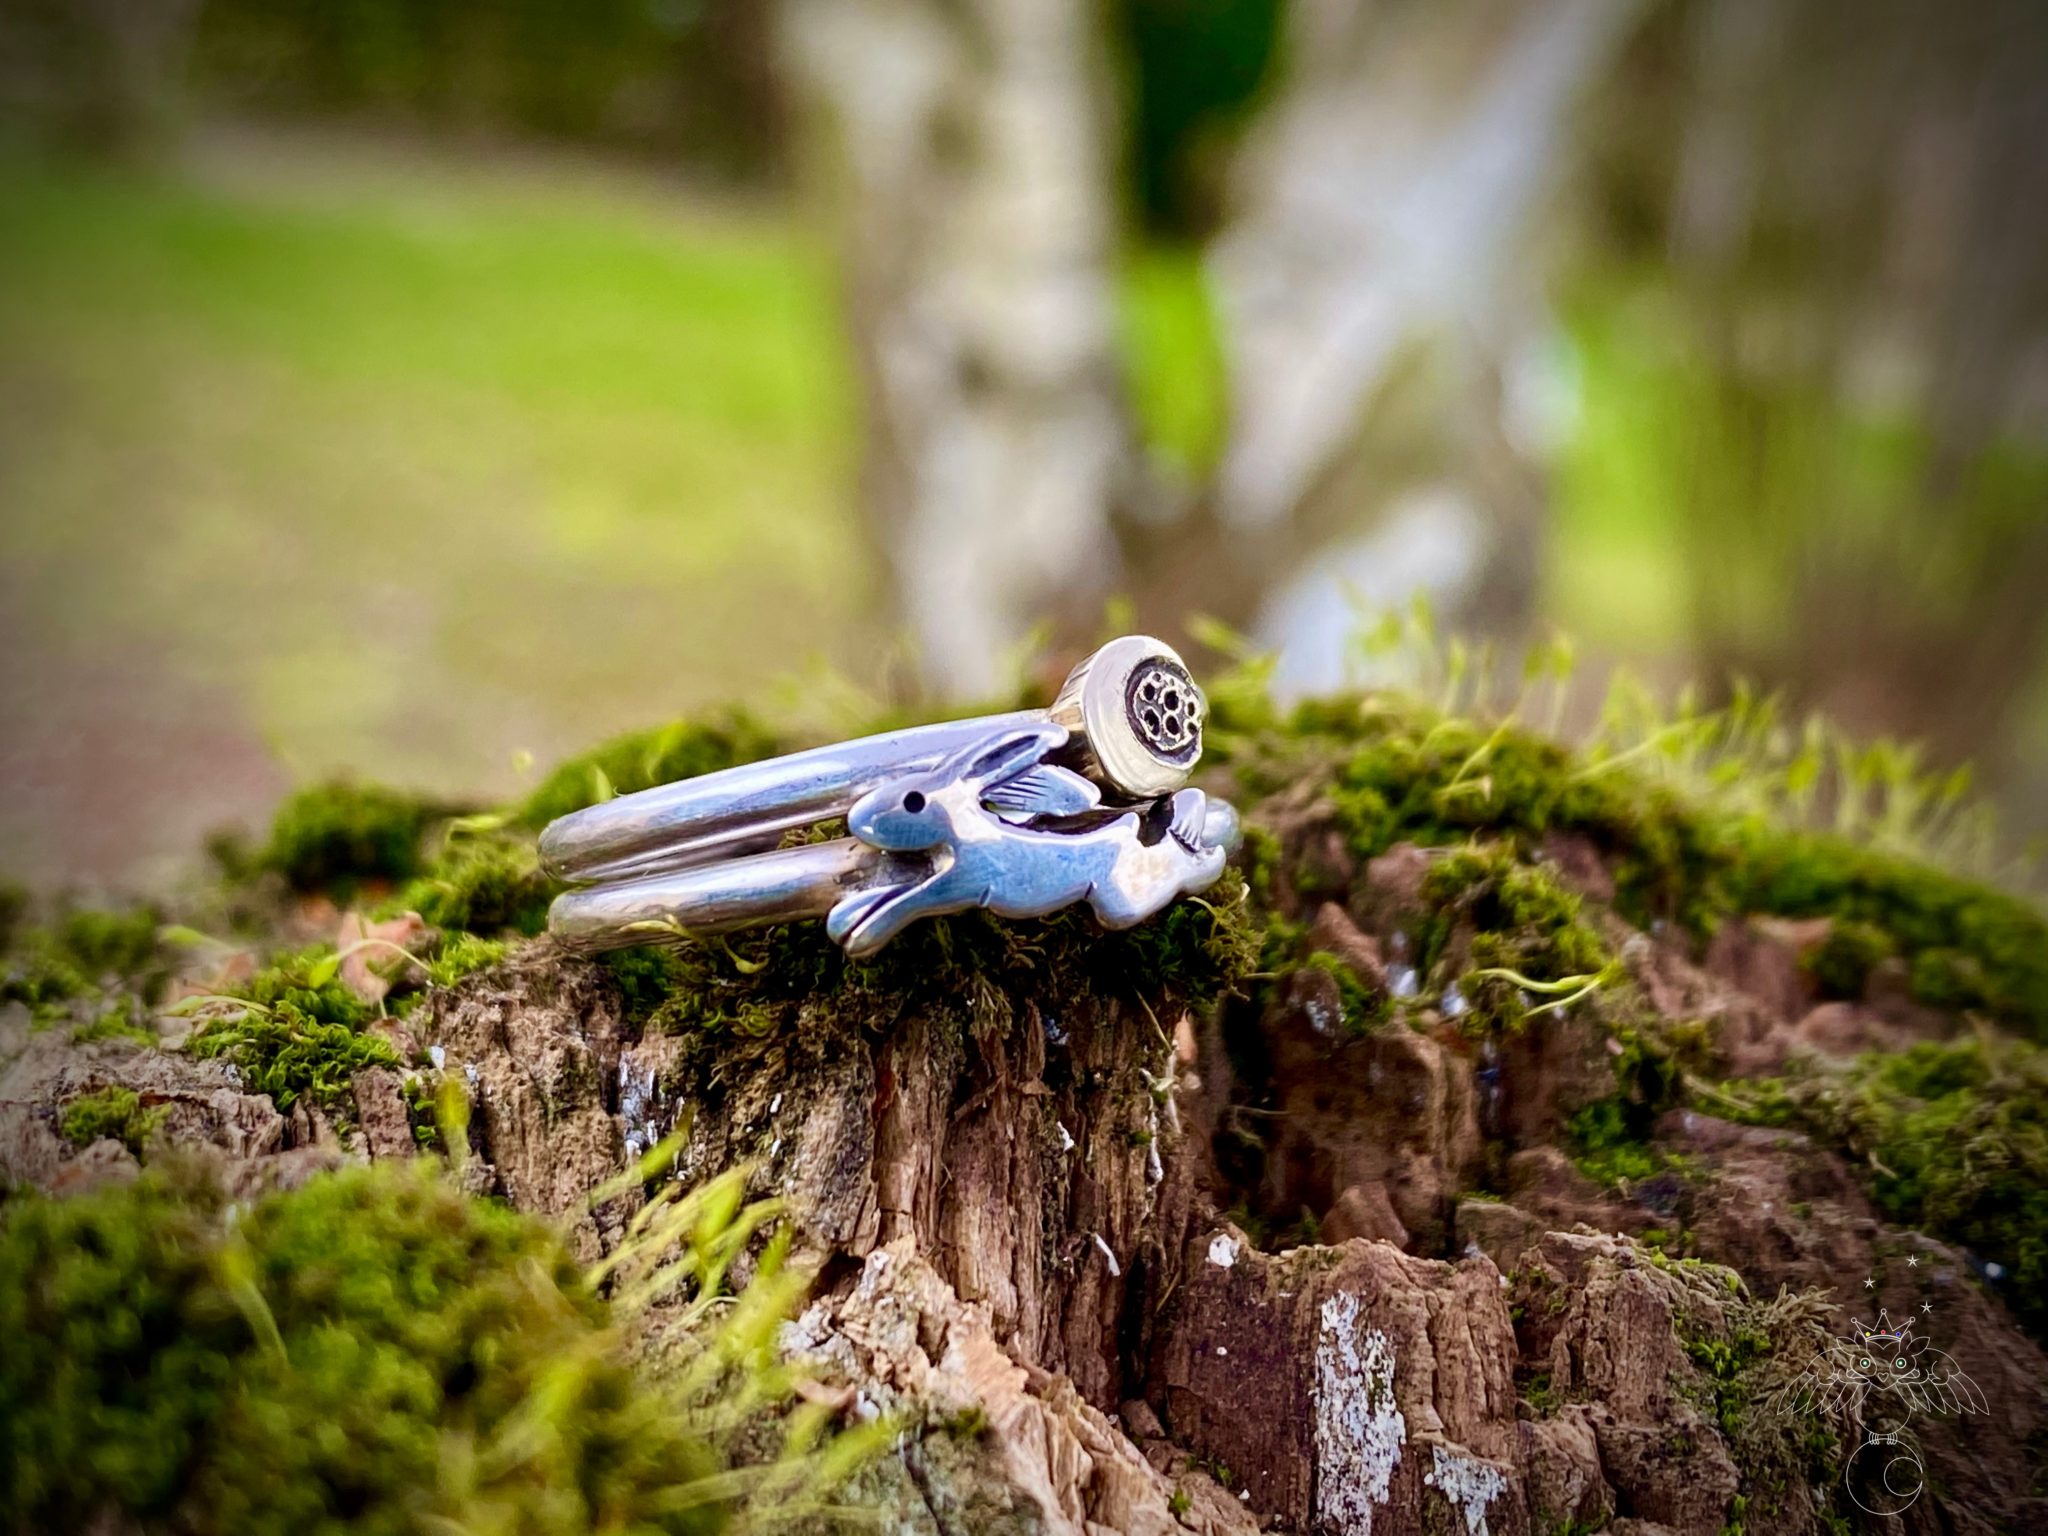 handmade leaping hare ring eco conscious, ethical, renewable, green jewellery made in Cambridge by local artisan jeweller with hand tools and love